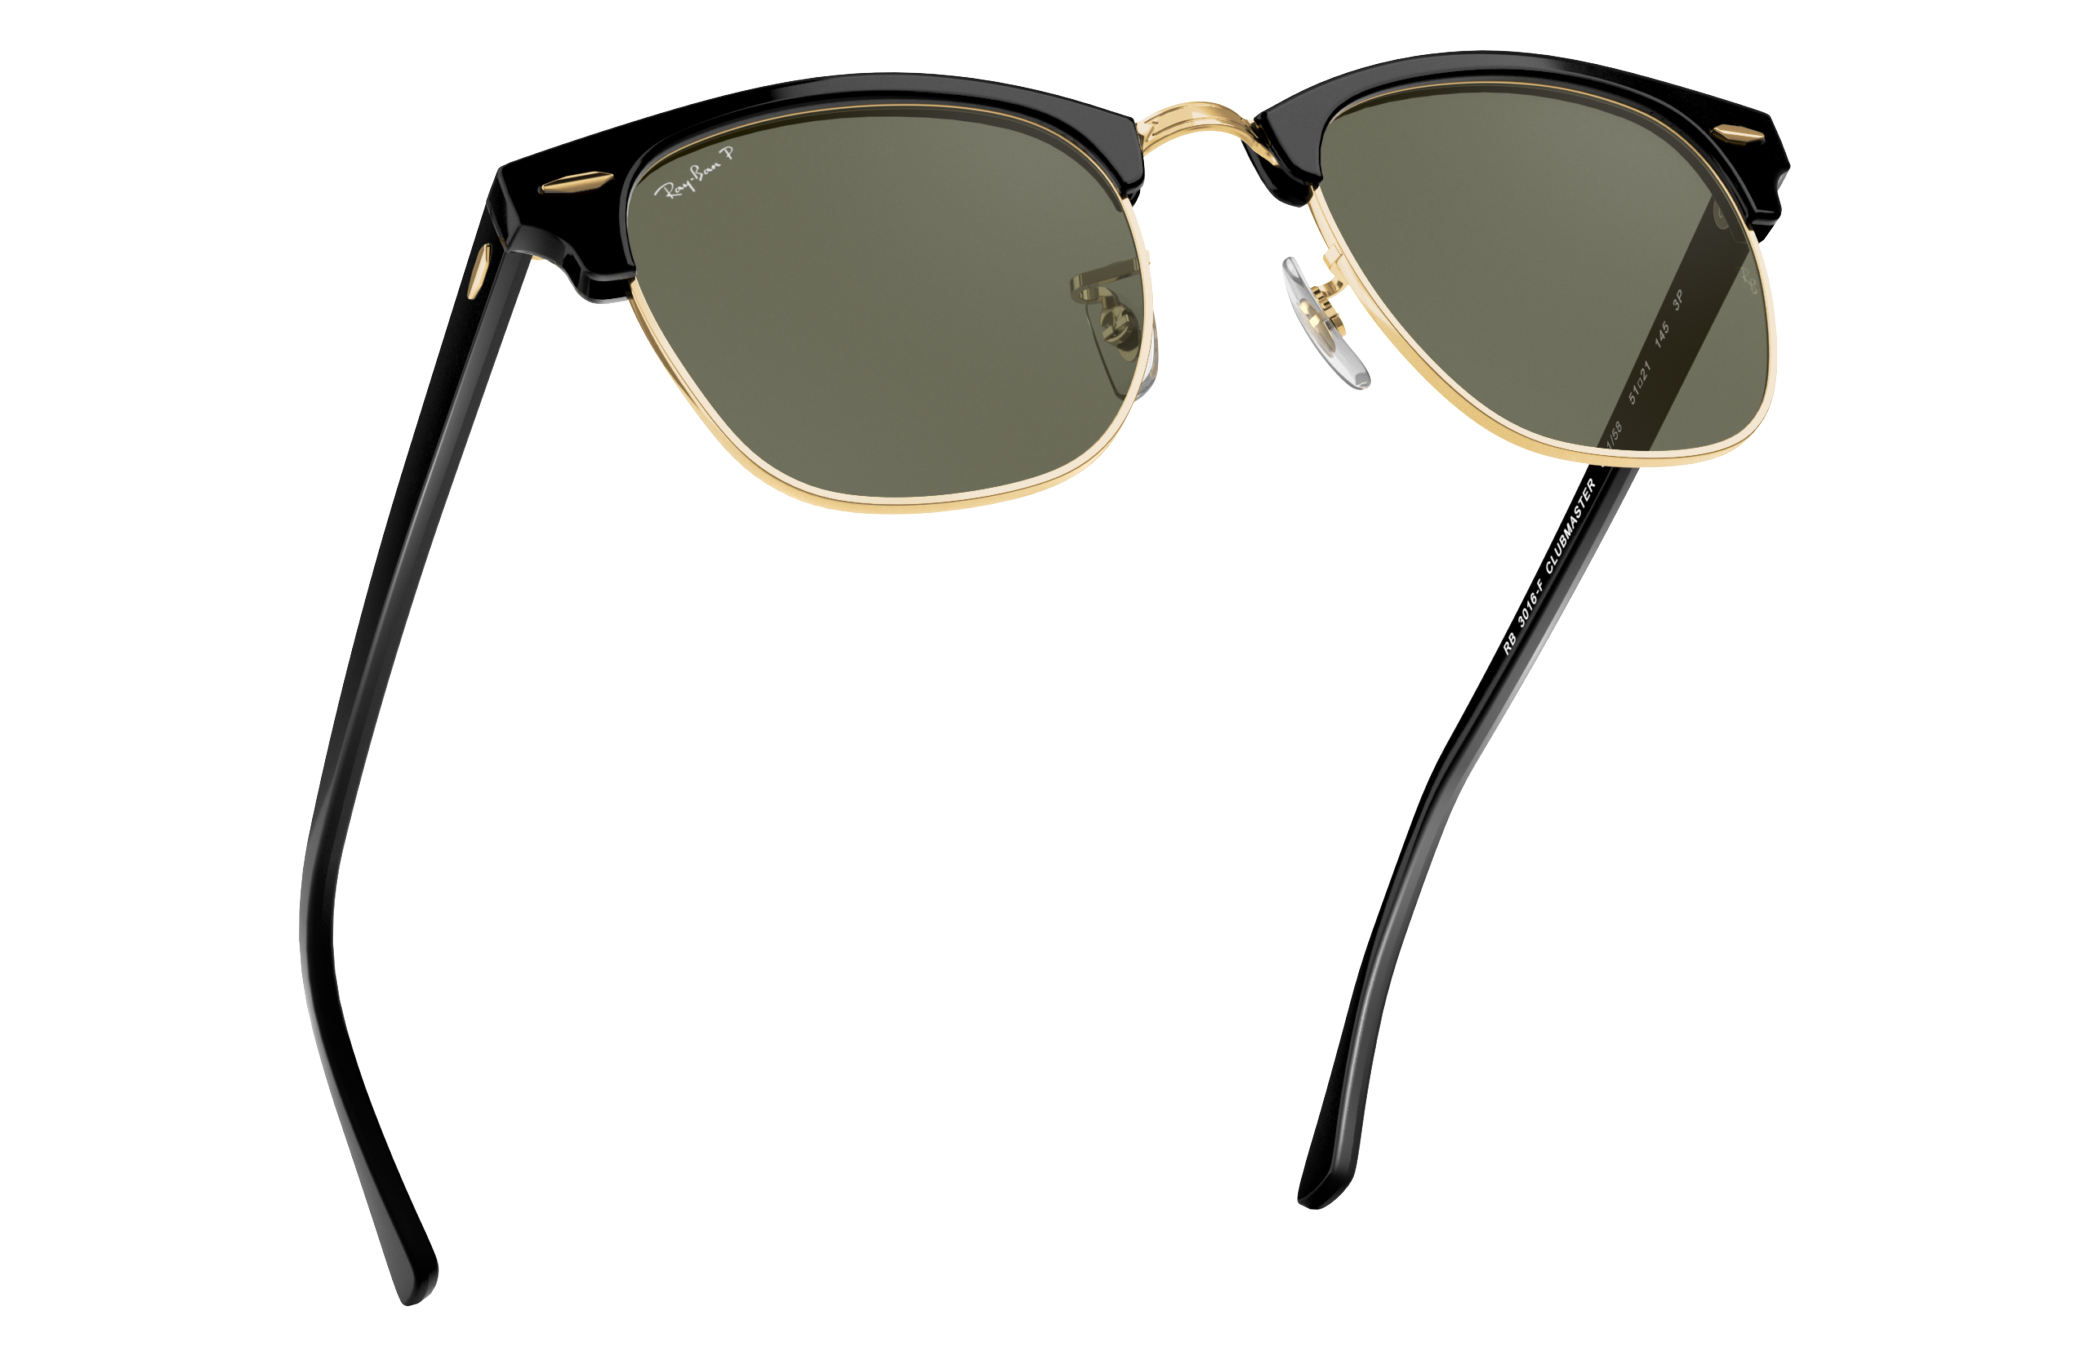 RB3016 Ray-Ban Clubmaster Sunglasses - YouTube